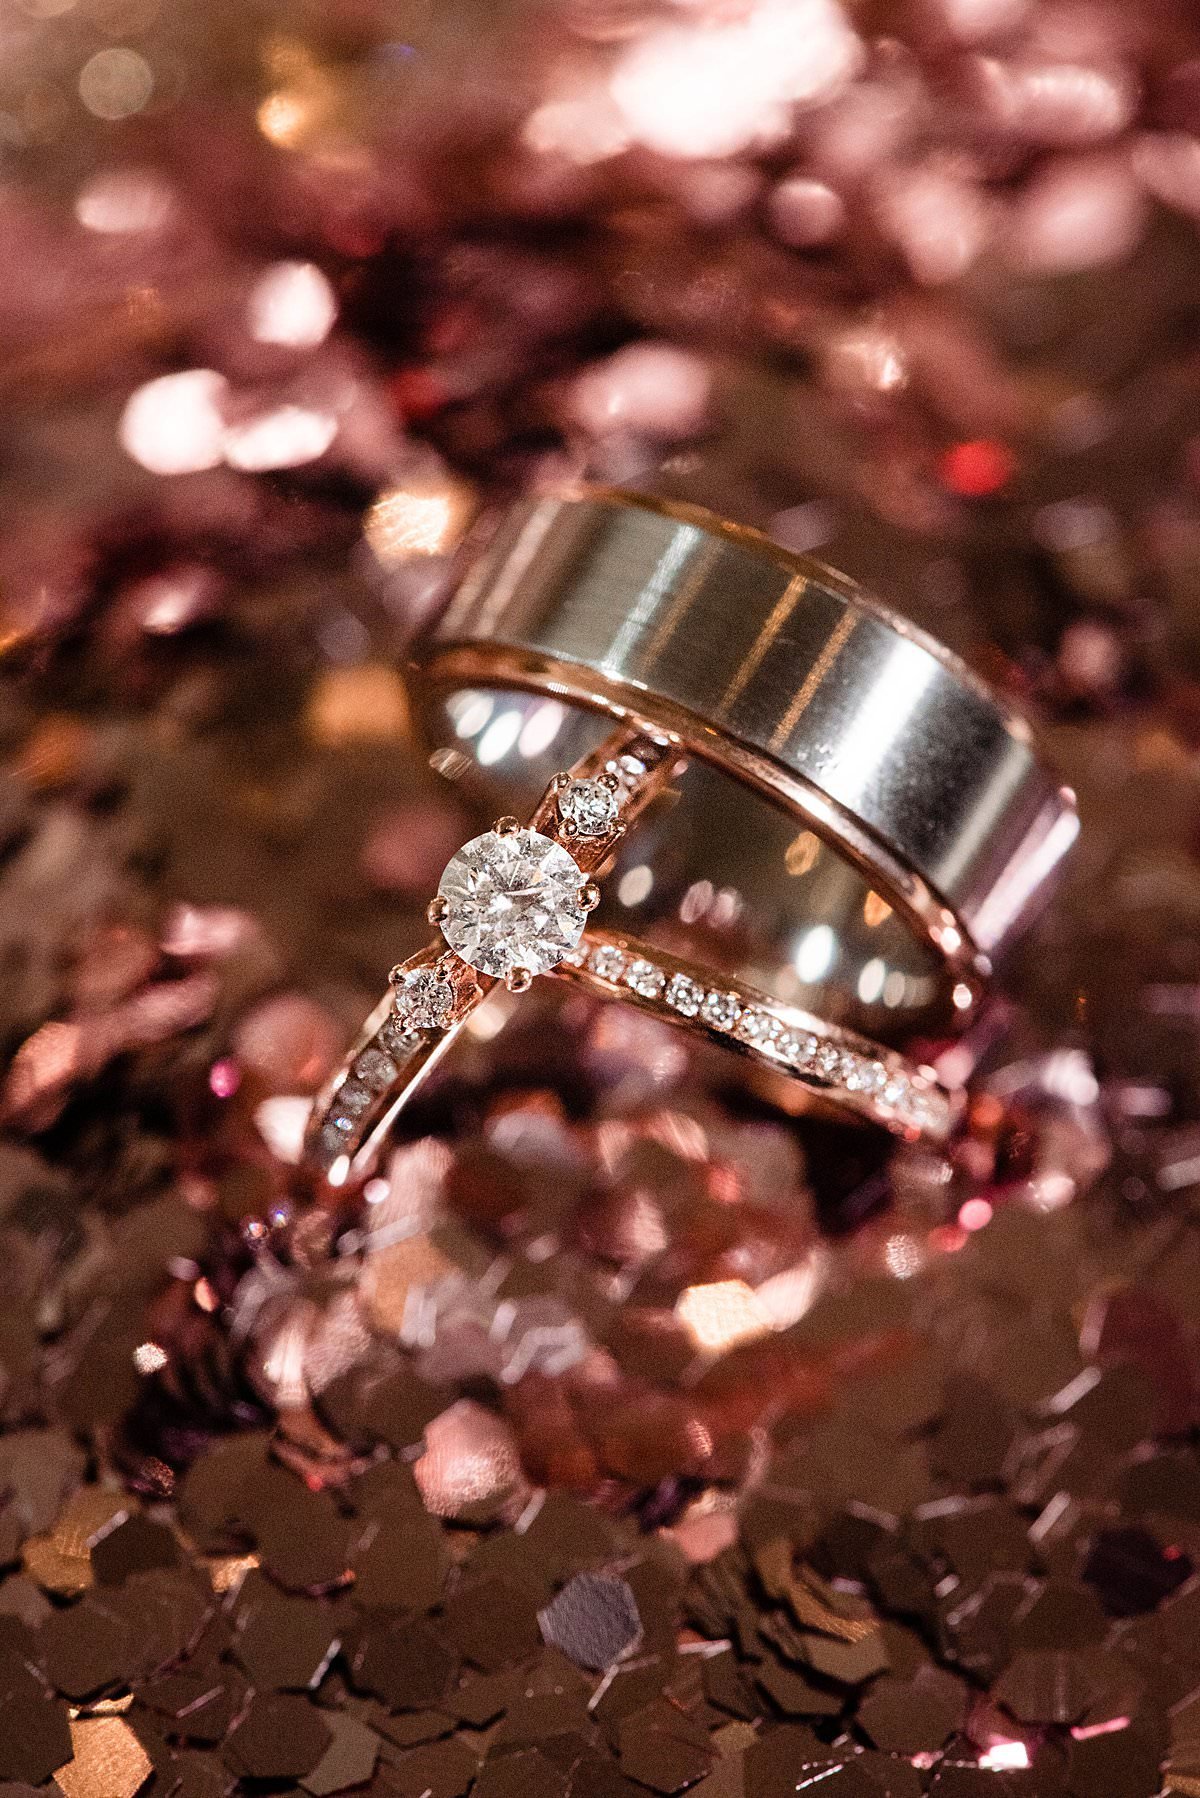 Detail photo of rose gold rings together in rose gold glitter